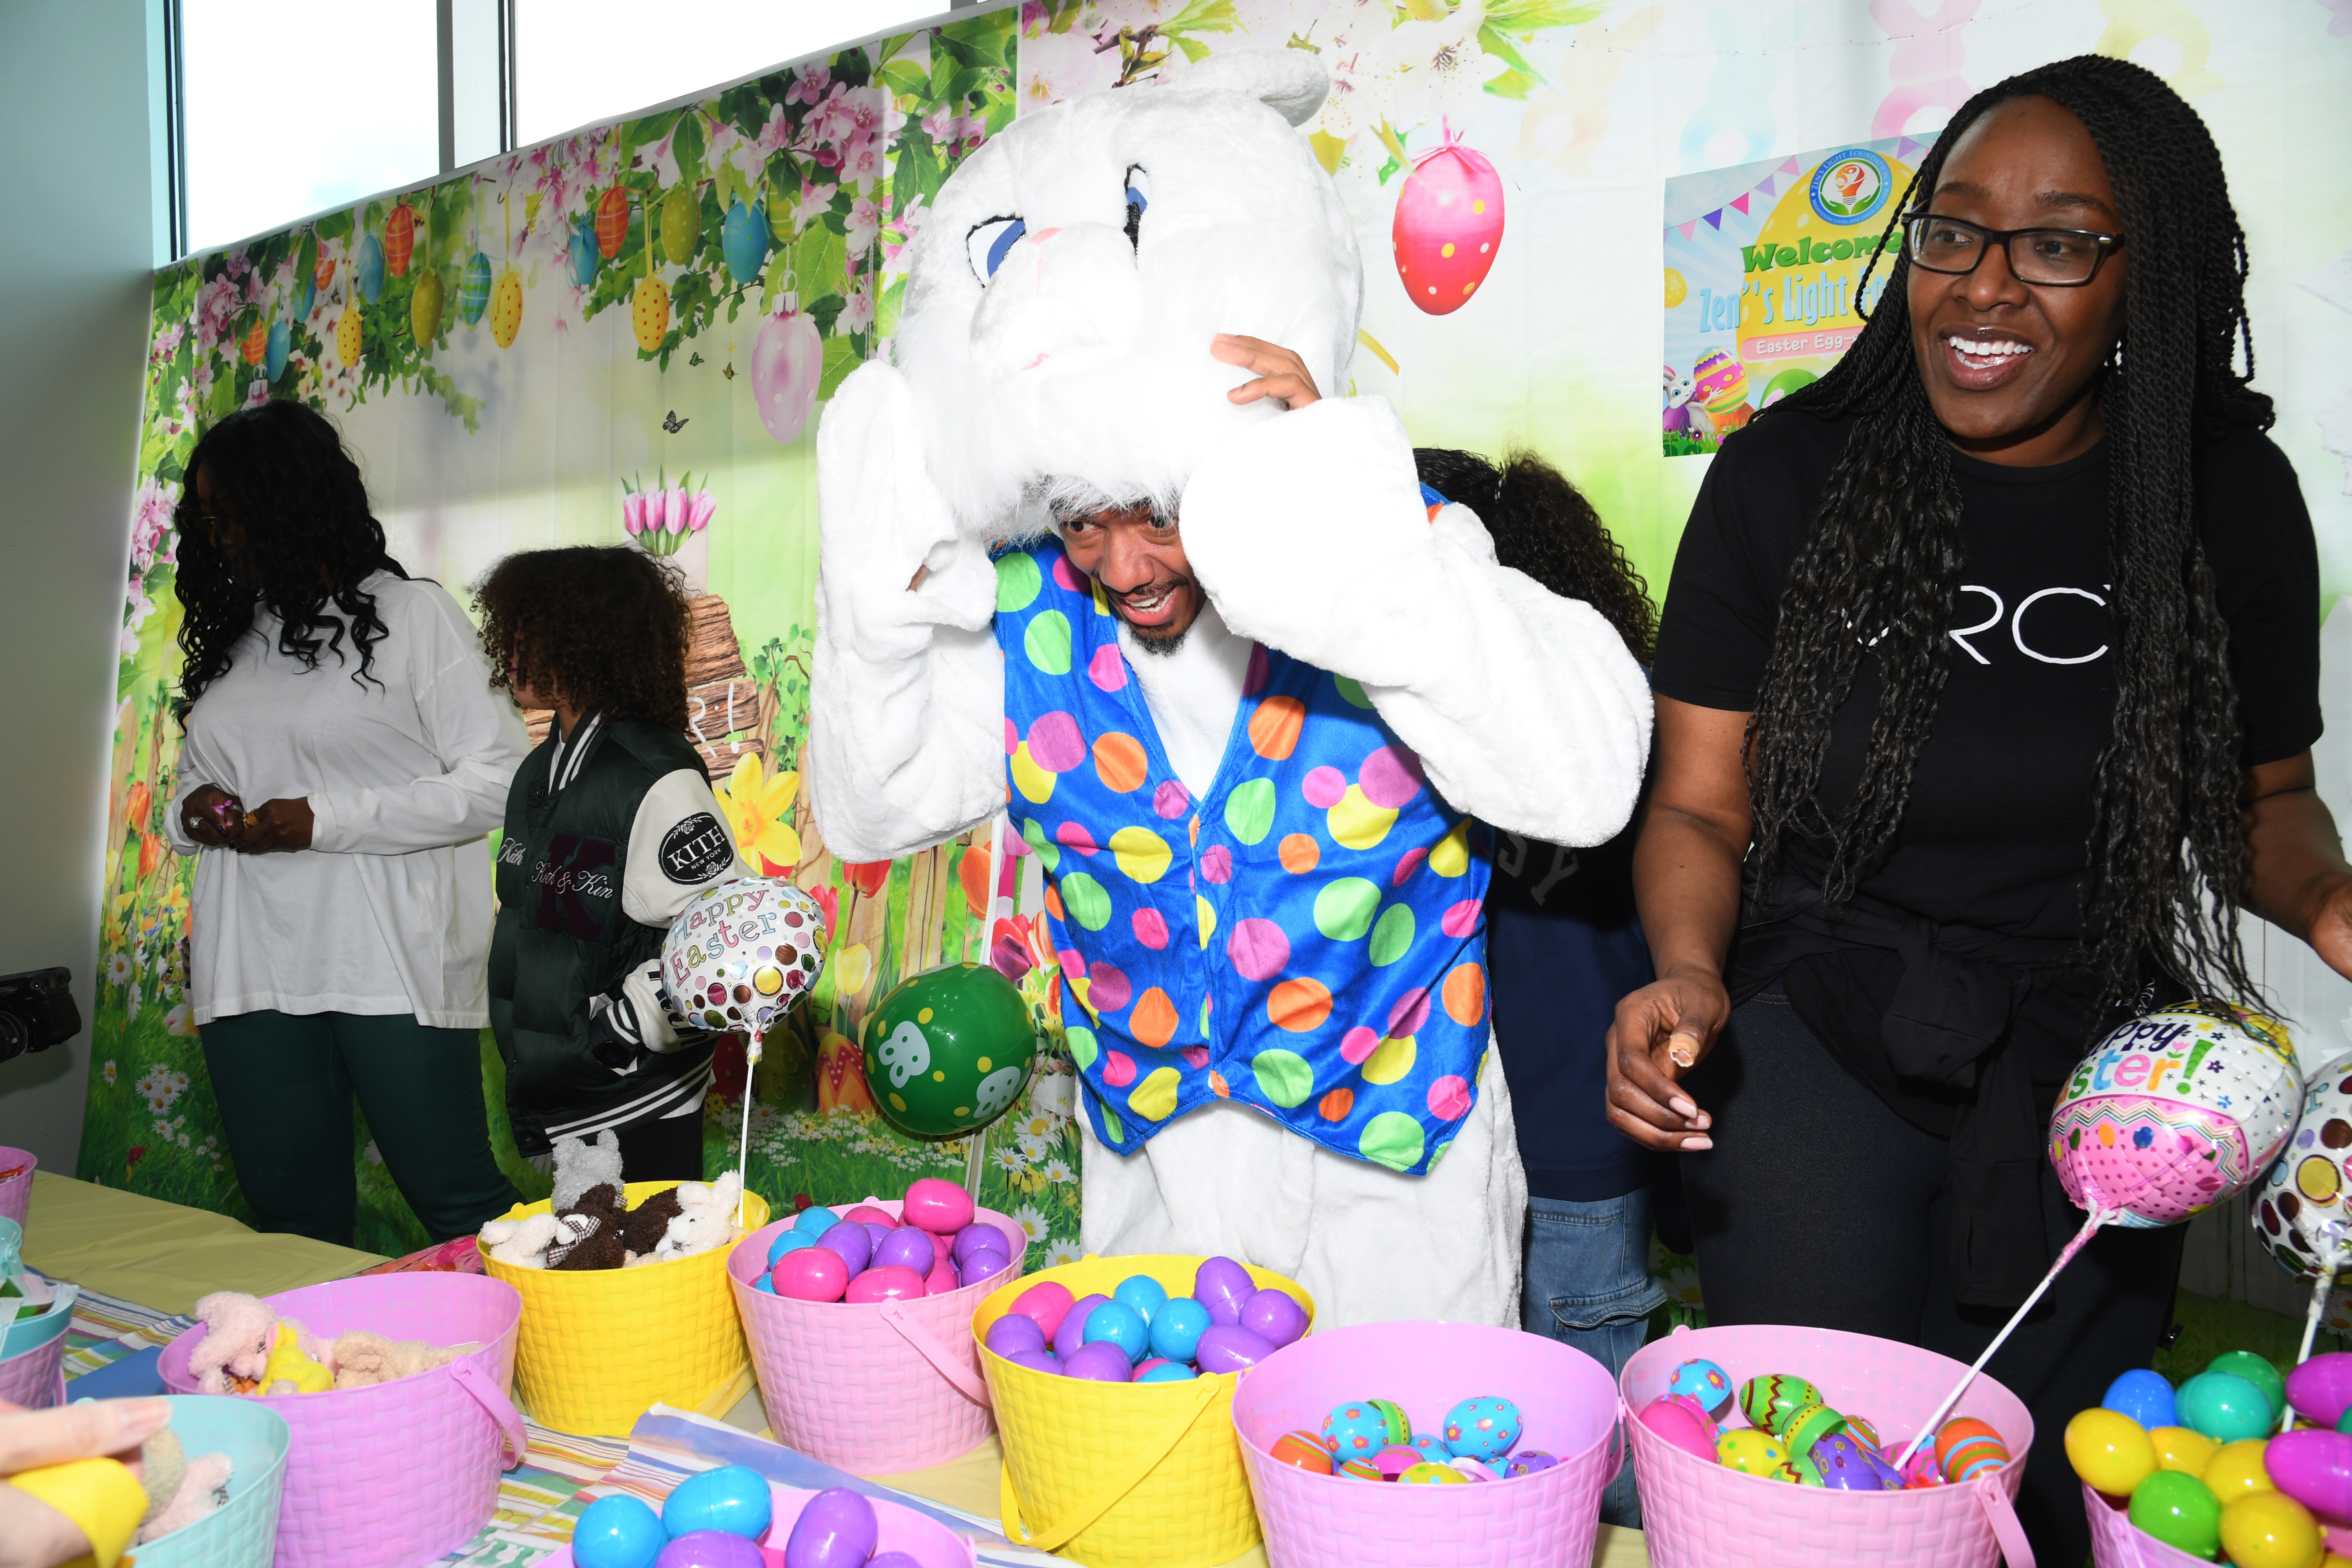 The dad of 12 dressed up for an Easter egg extravaganza at a children's hospital in Queens, hosted by Zen’s Light Foundation in honor of his late son